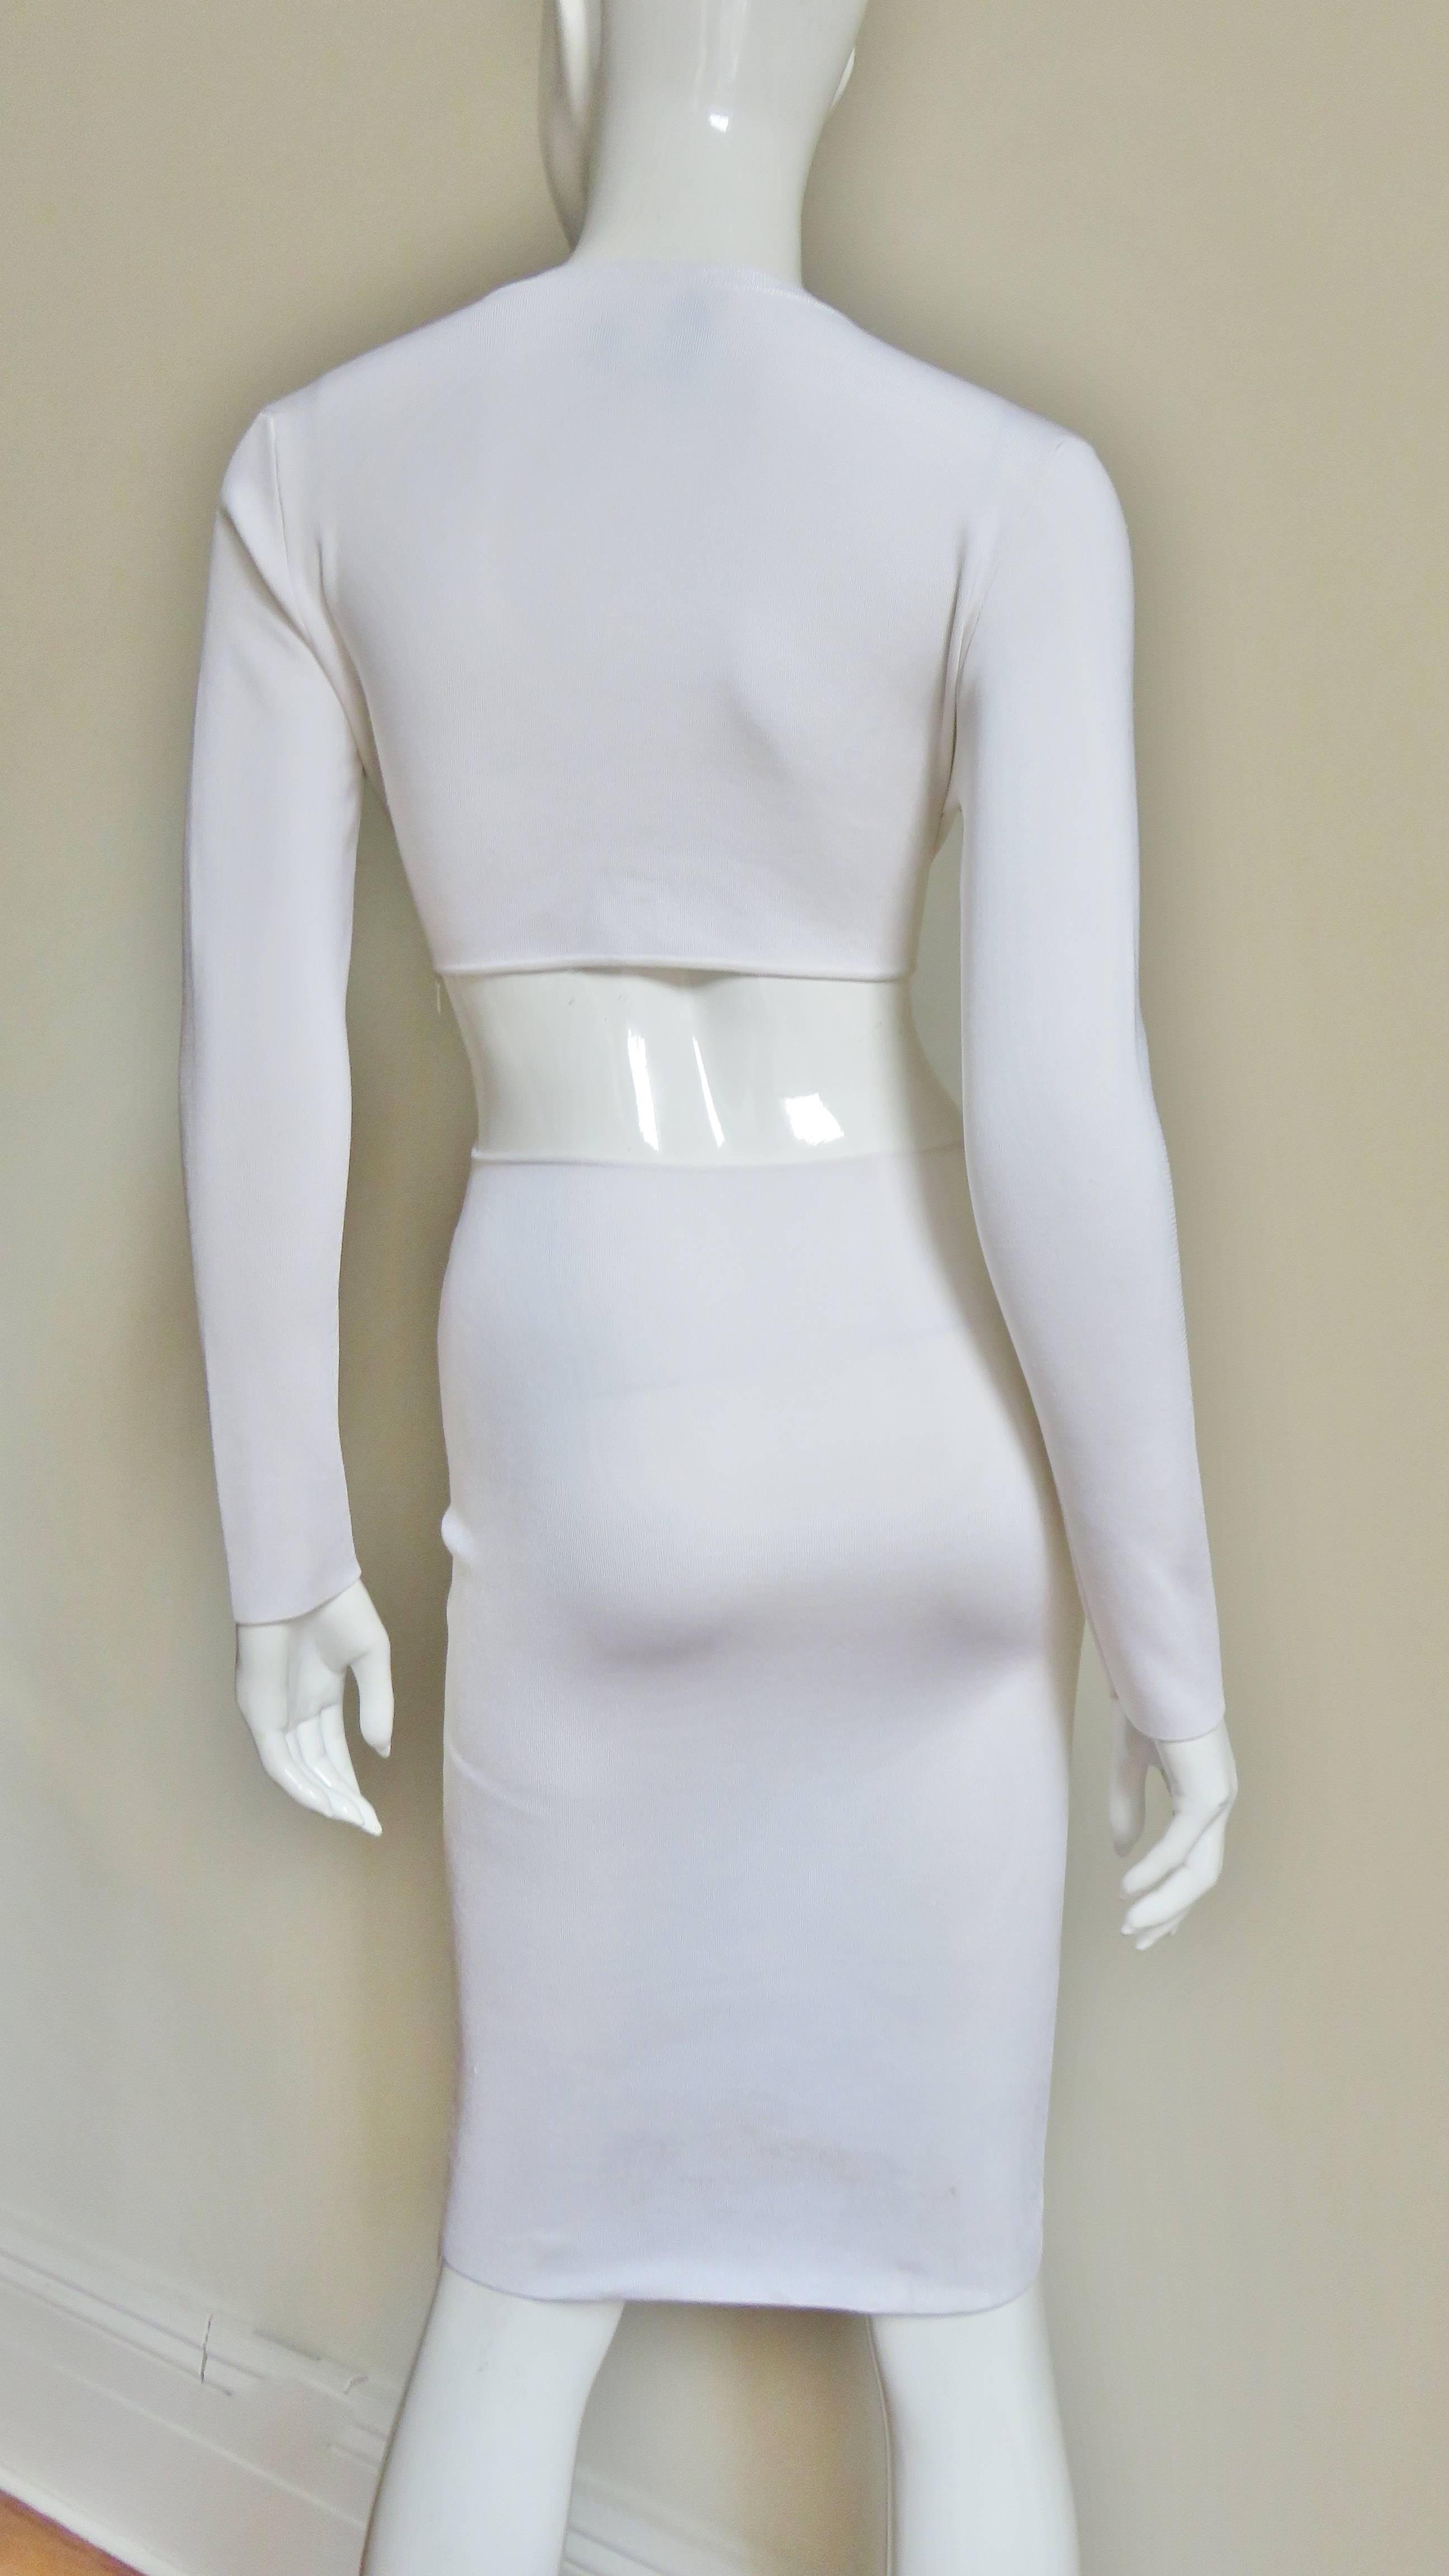 Incredible Tom Ford Plunging Cutout Waist Dress 1